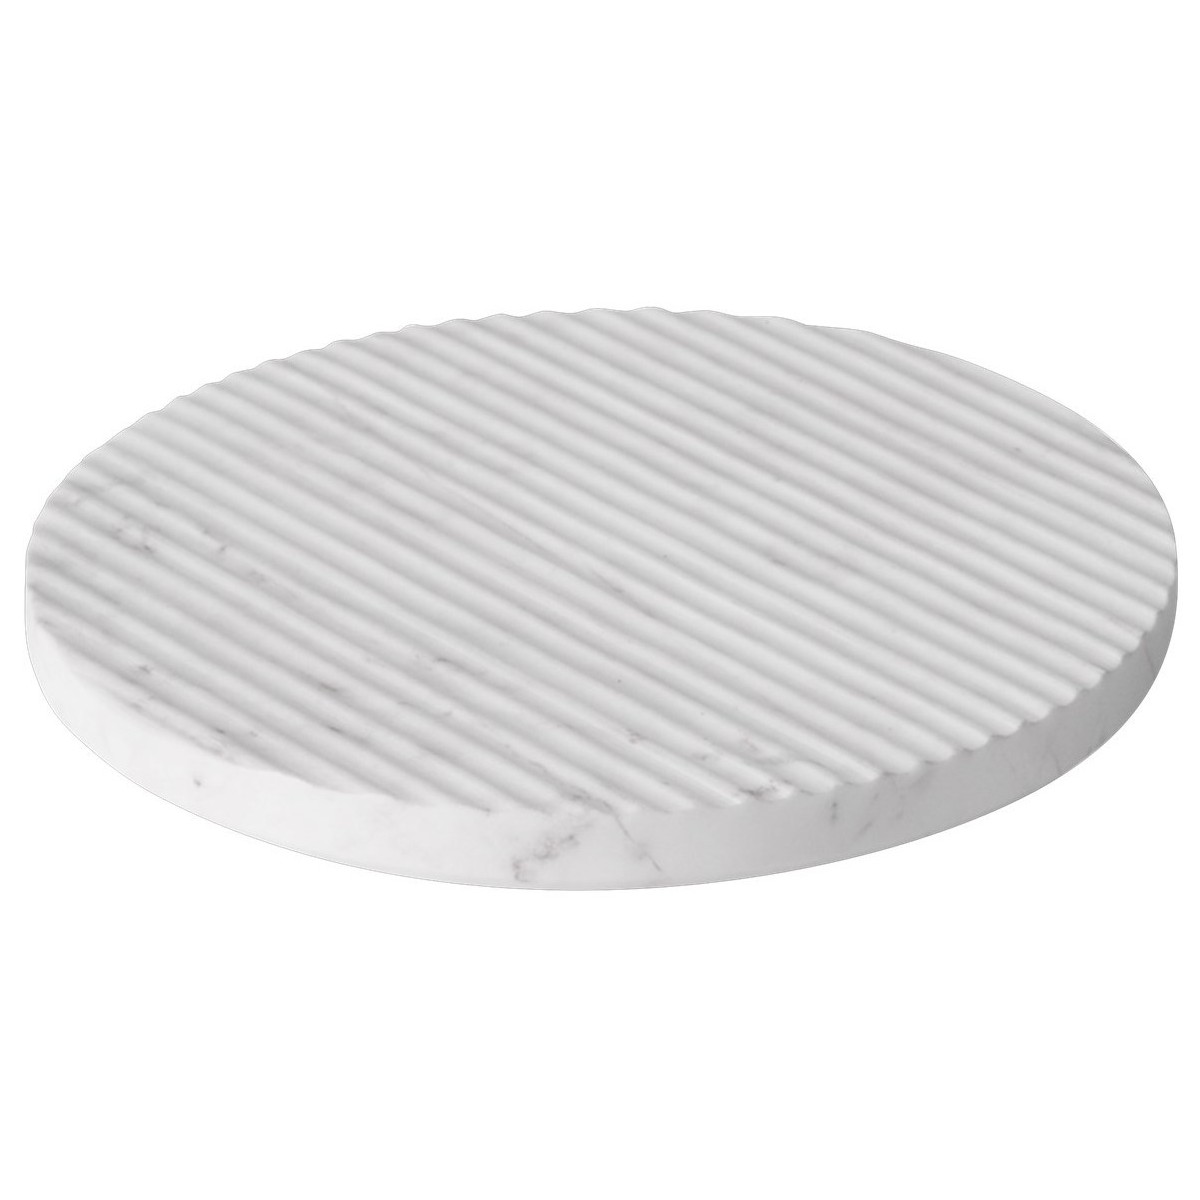 SOLD OUT Ø21.6cm - white - Groove Trivet